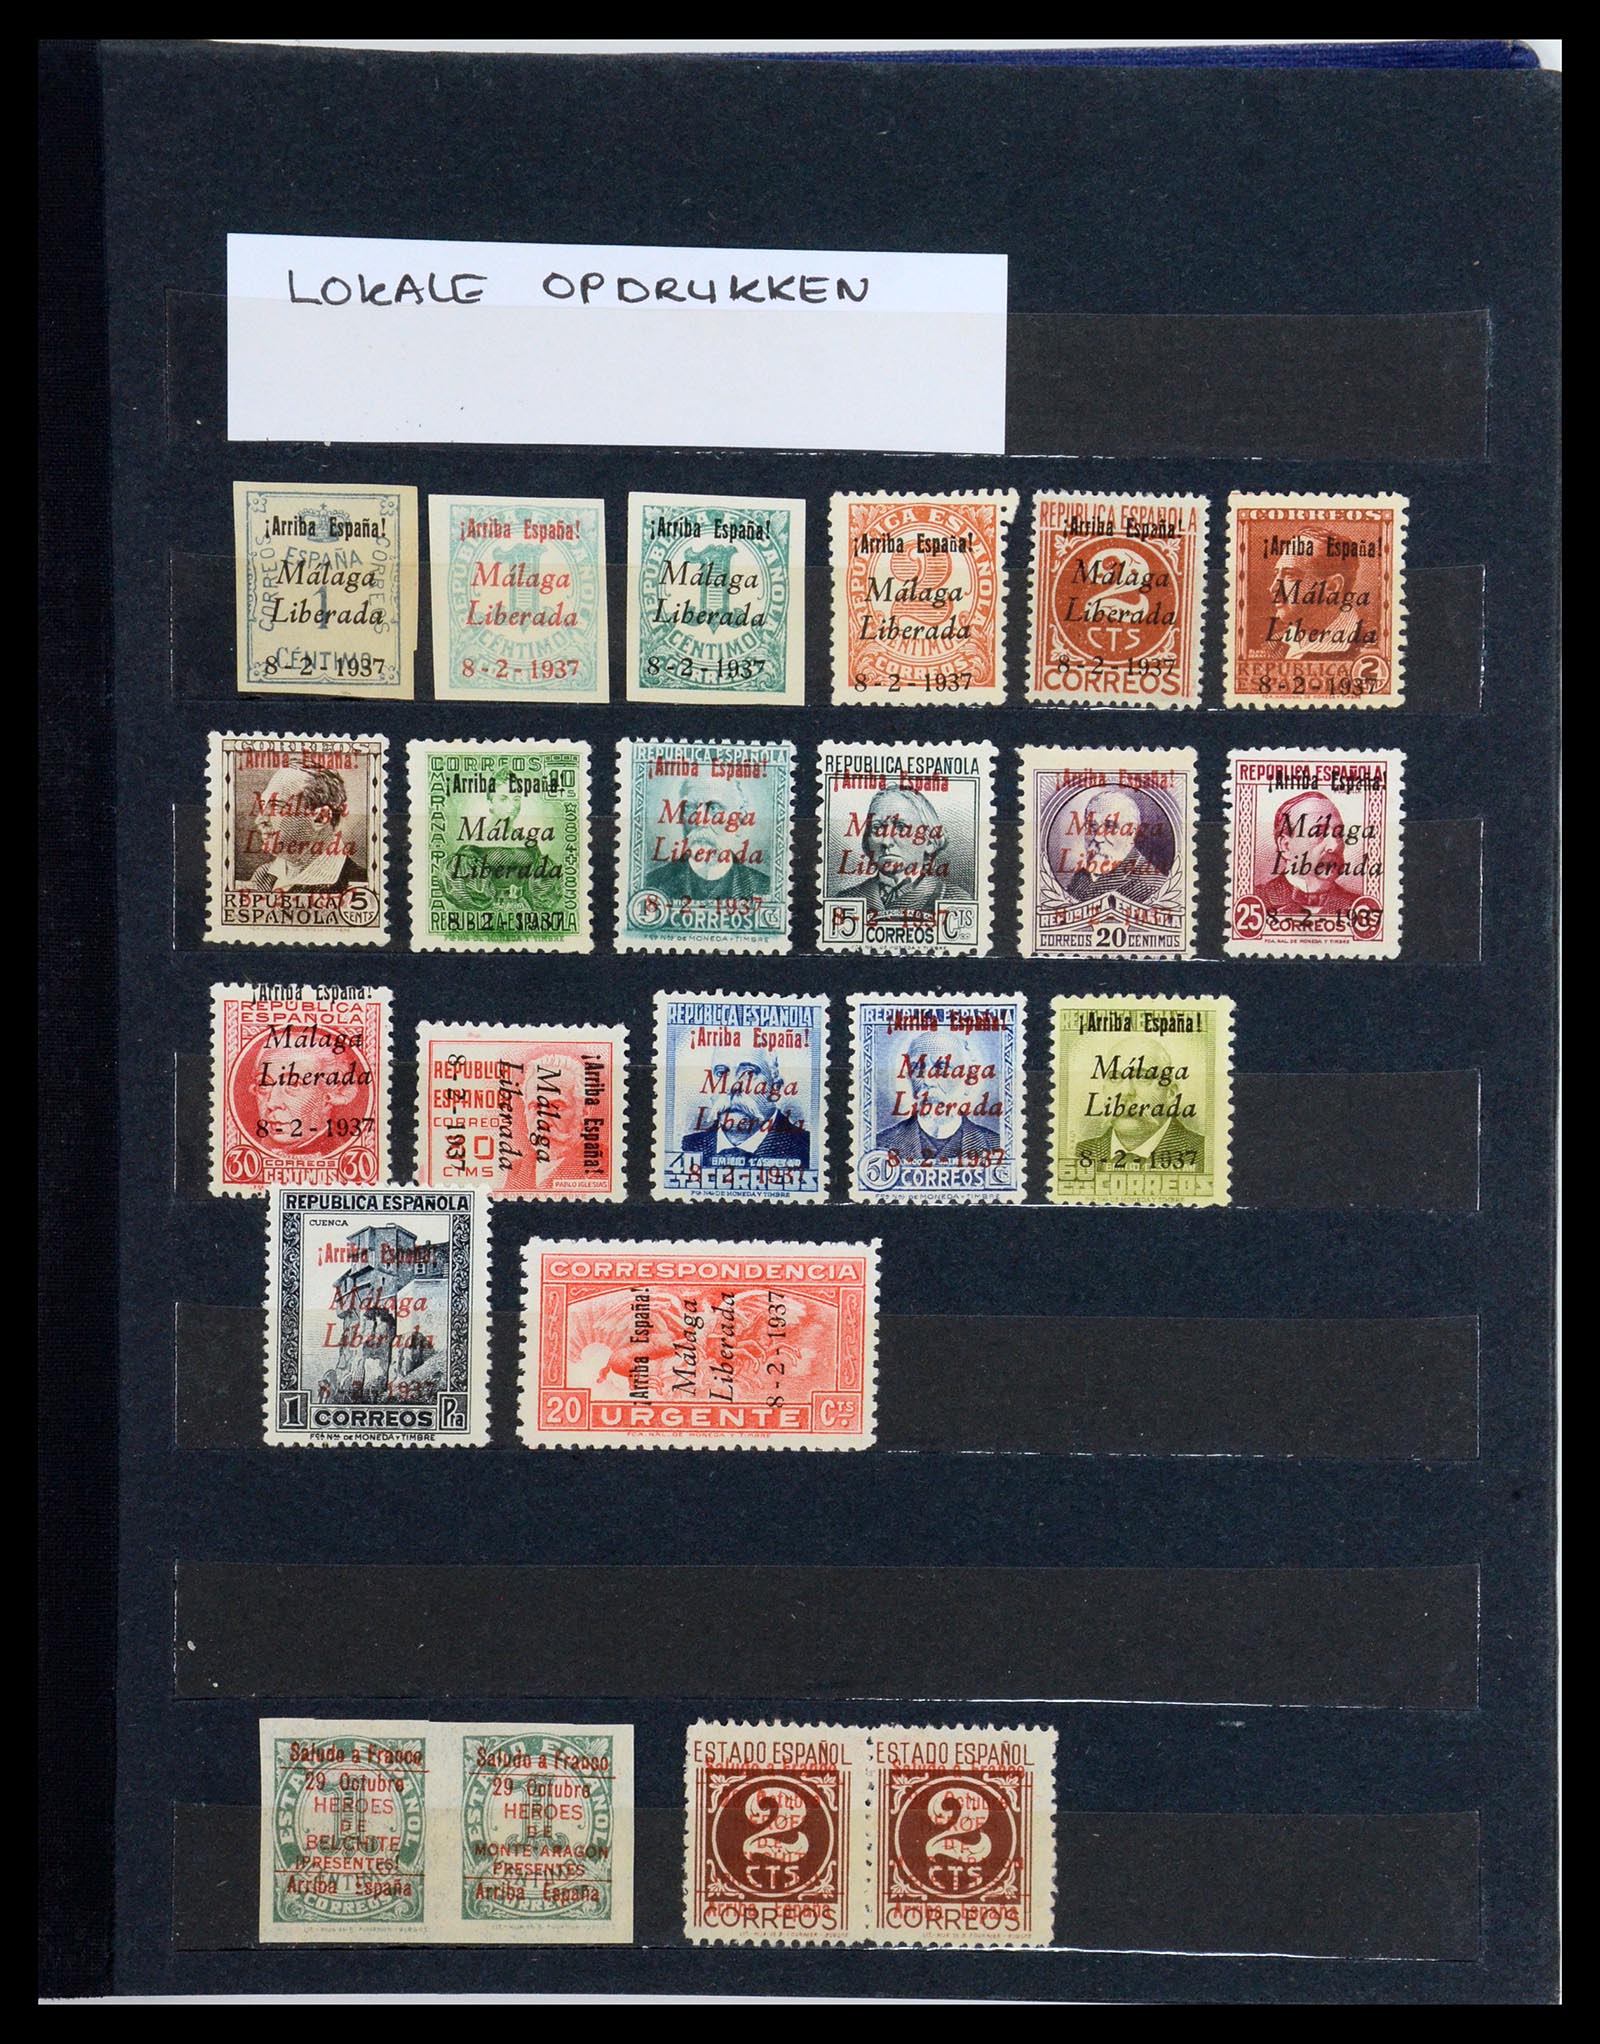 35824 001 - Stamp Collection 35824 Spanish civil war and local issues 1936-1937.